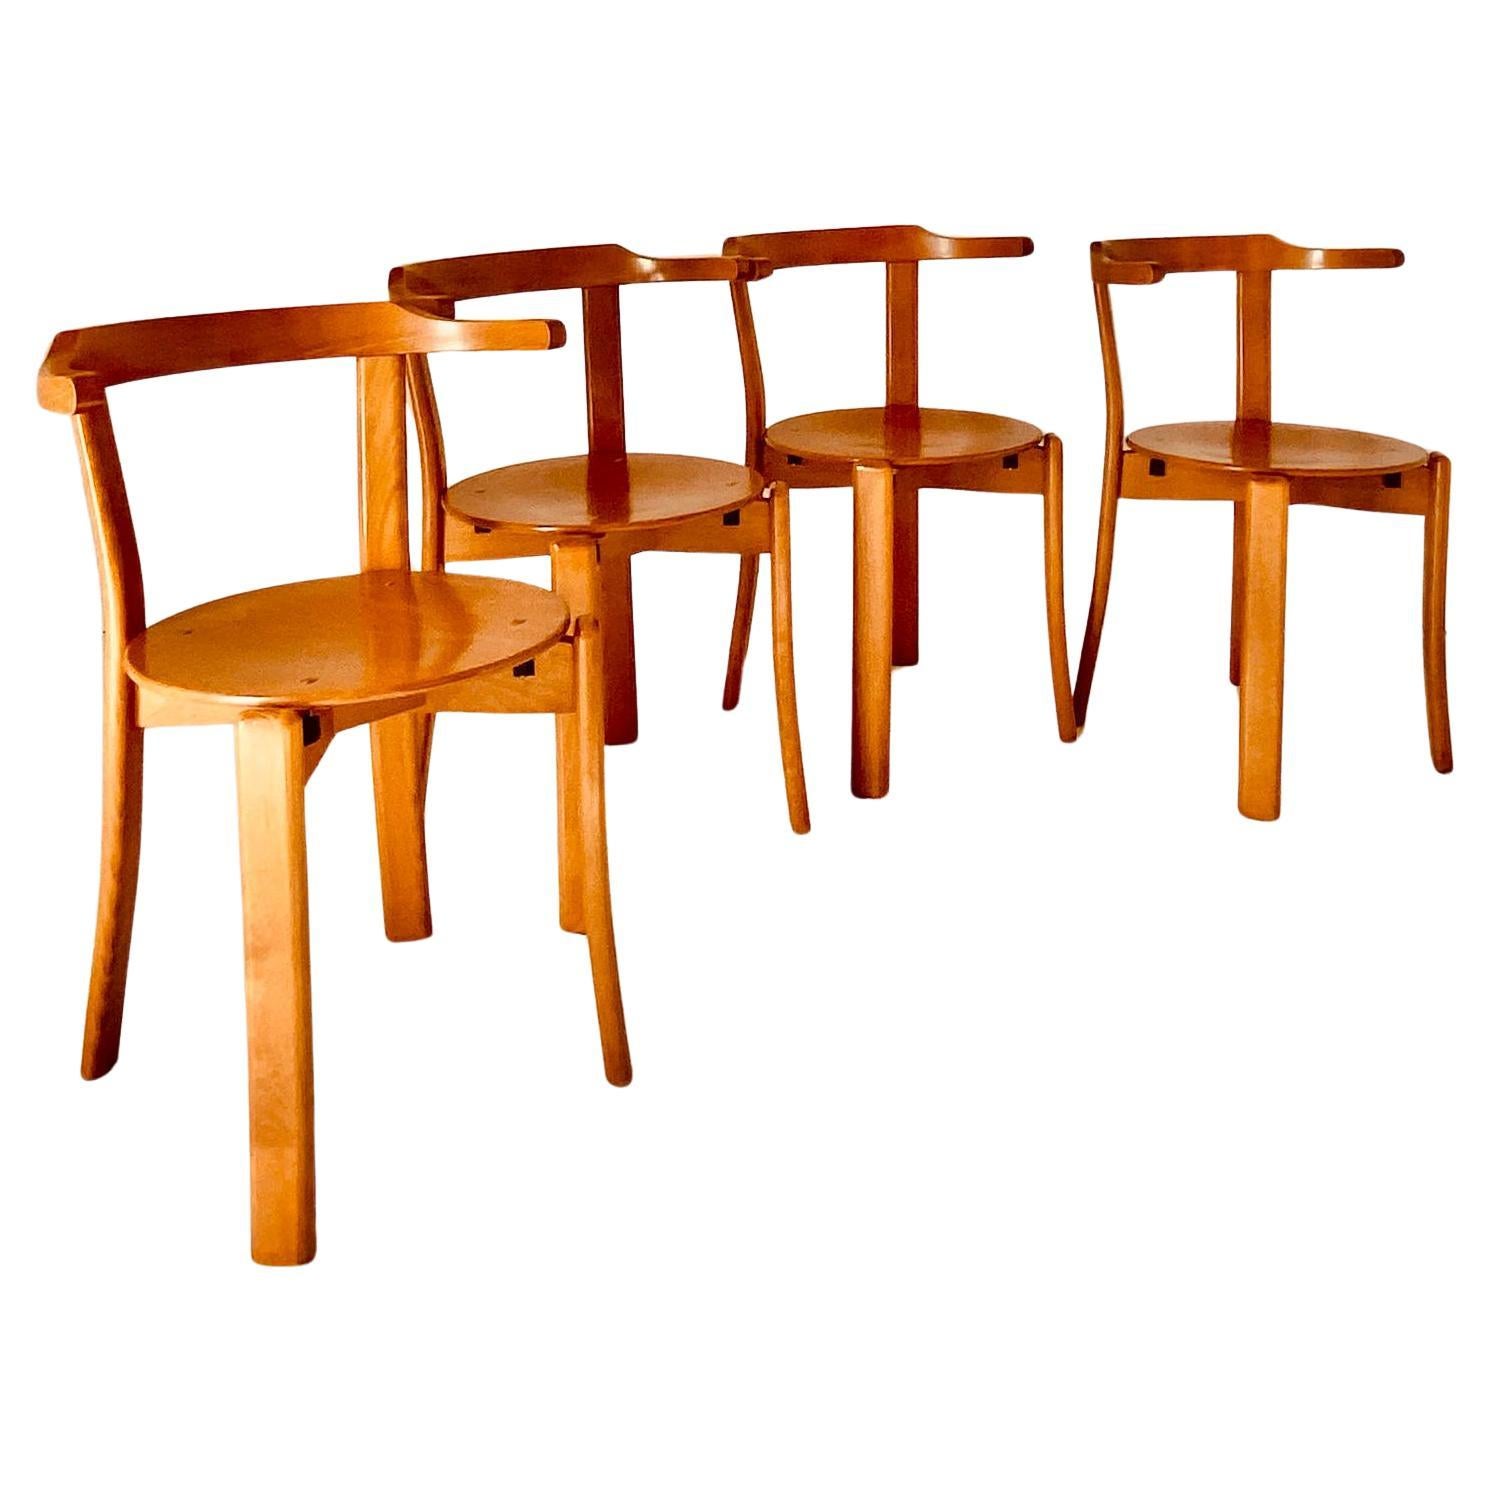 Vintage dining chairs set, in the style of Bruno Rey, Italy 1970s. Solid beech wood chairs with refined curved wood back seat and round seat. The set has been restored as follows:
wood has been polished and repaired where needed. Very sturdy and